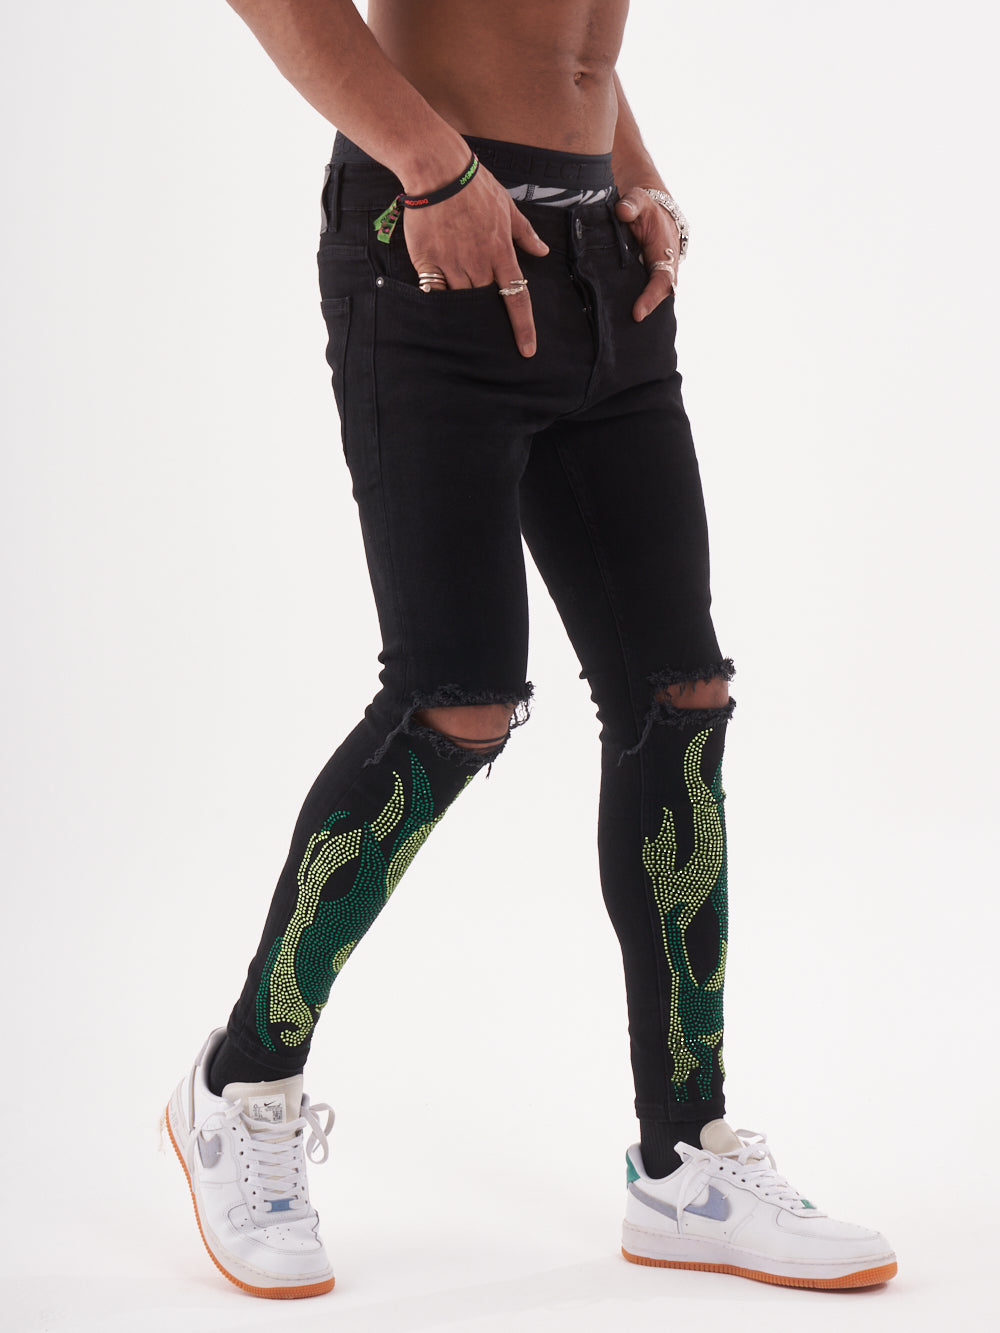 A man wearing HELLFIRE | GREEN ripped rhinestone jeans and white sneakers.